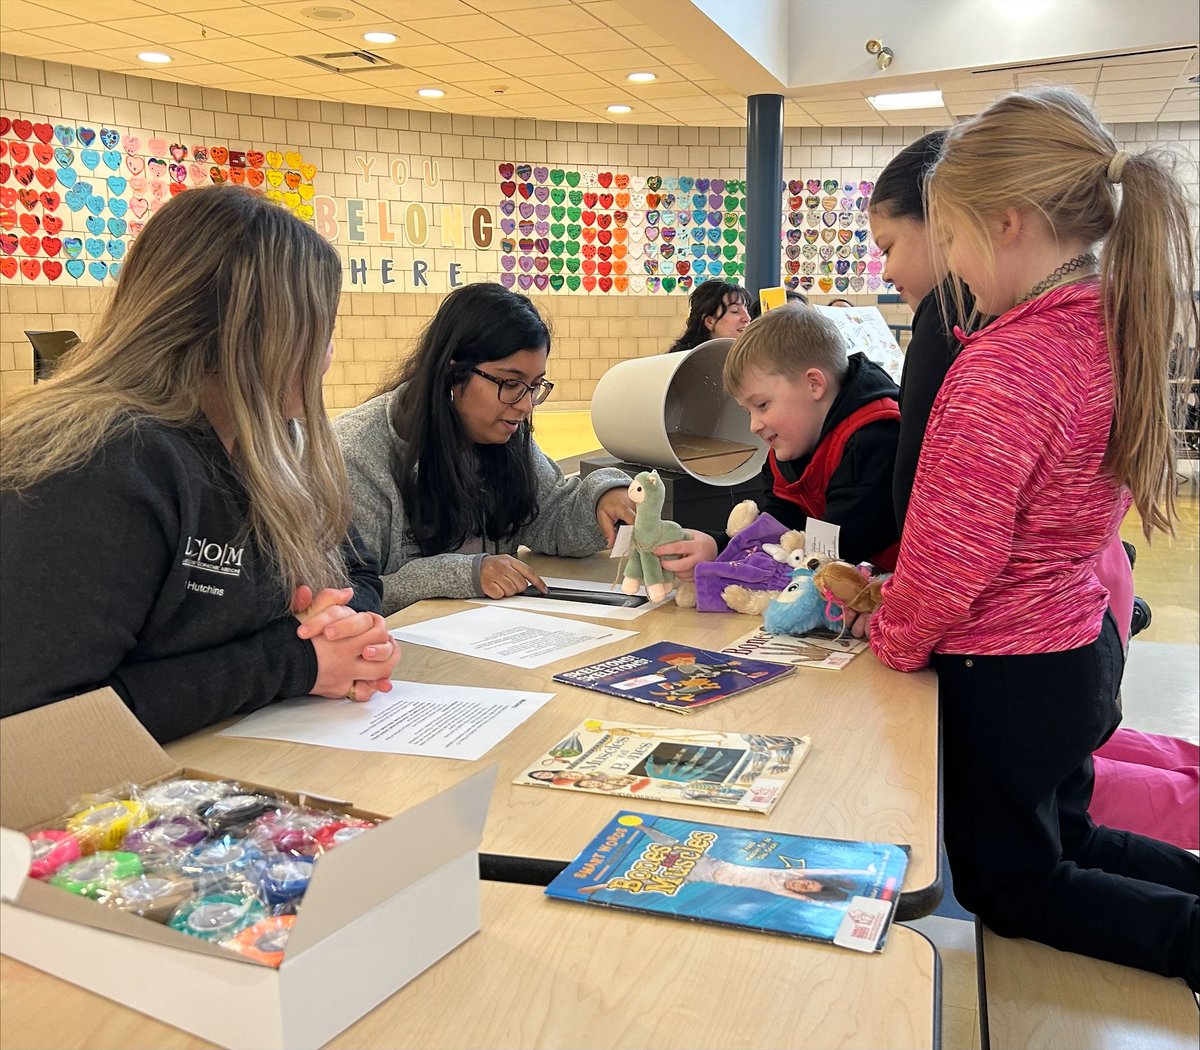 🧸 Our LECOM at Elmira students had a heartwarming experience participating in the Teddy Bear Clinic at Economic Opportunity Program, Inc. Dedicated to spreading joy and healthcare education, we cherish moments like these.​ buff.ly/3yjrWIT